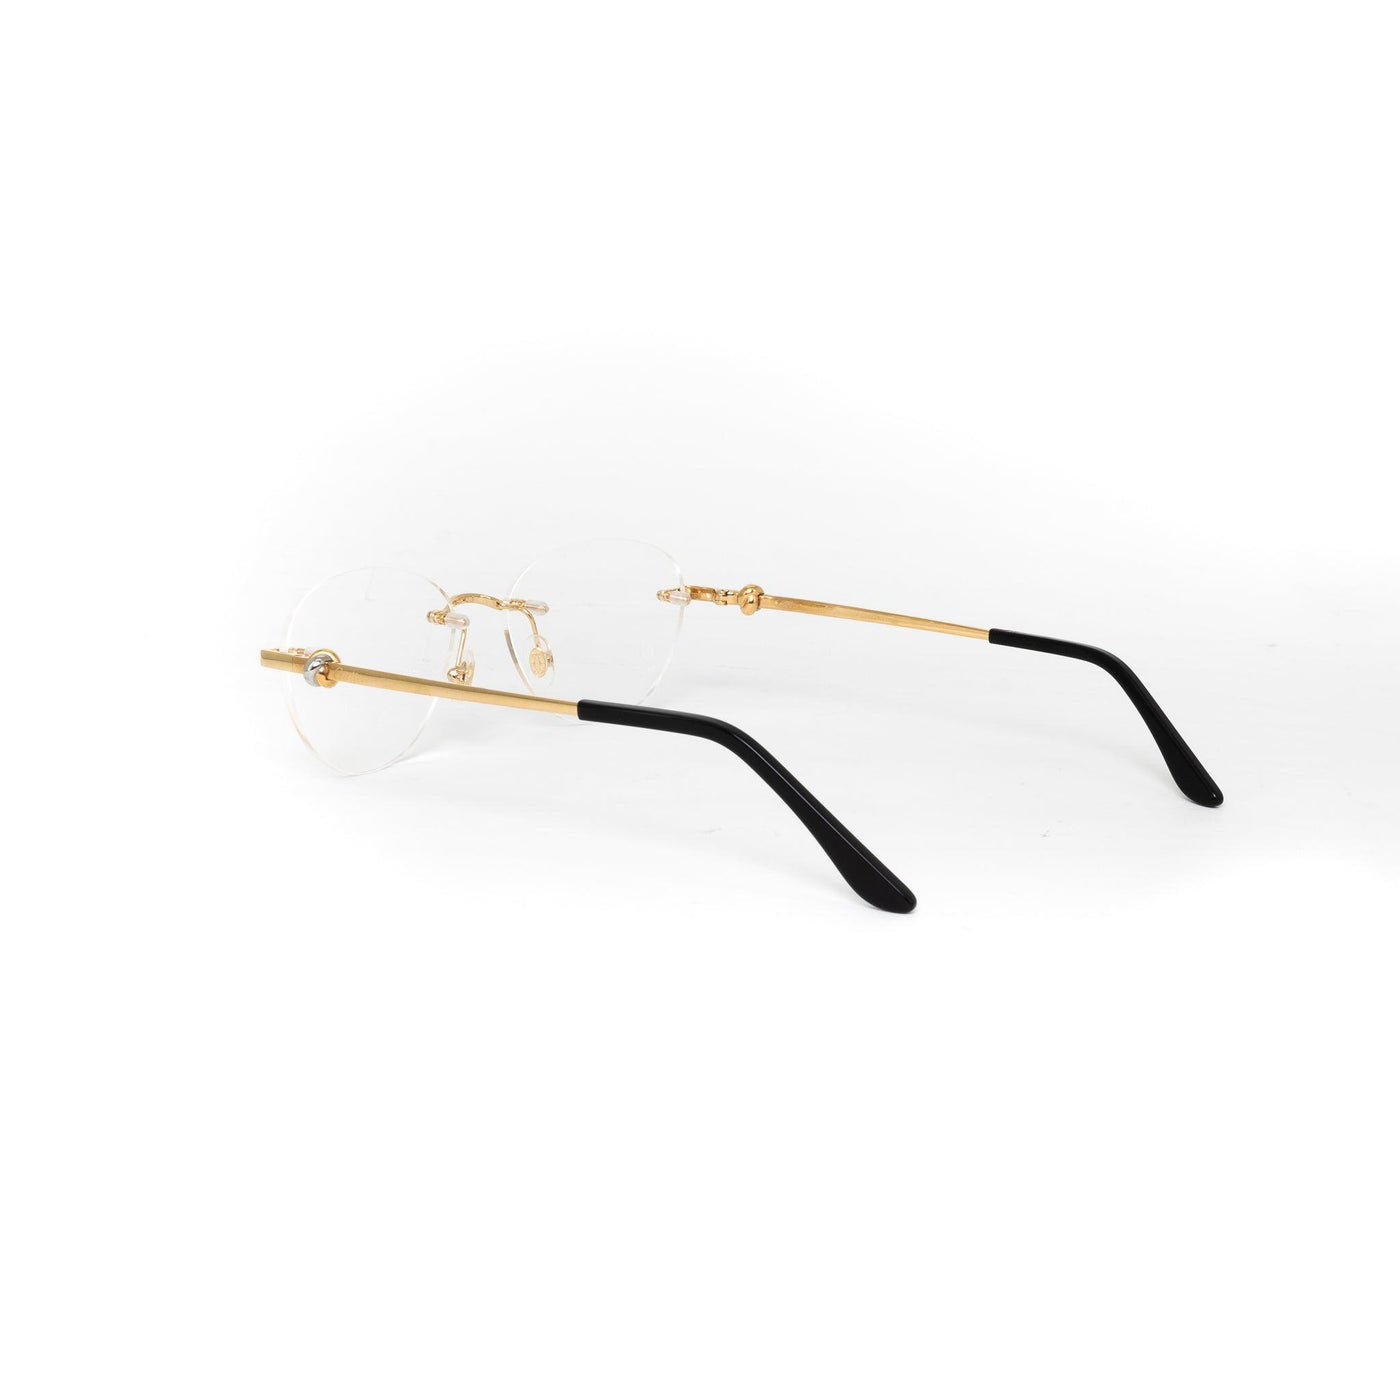 Cartier CT0224O/001 | Eyeglasses - Vision Express Optical Philippines